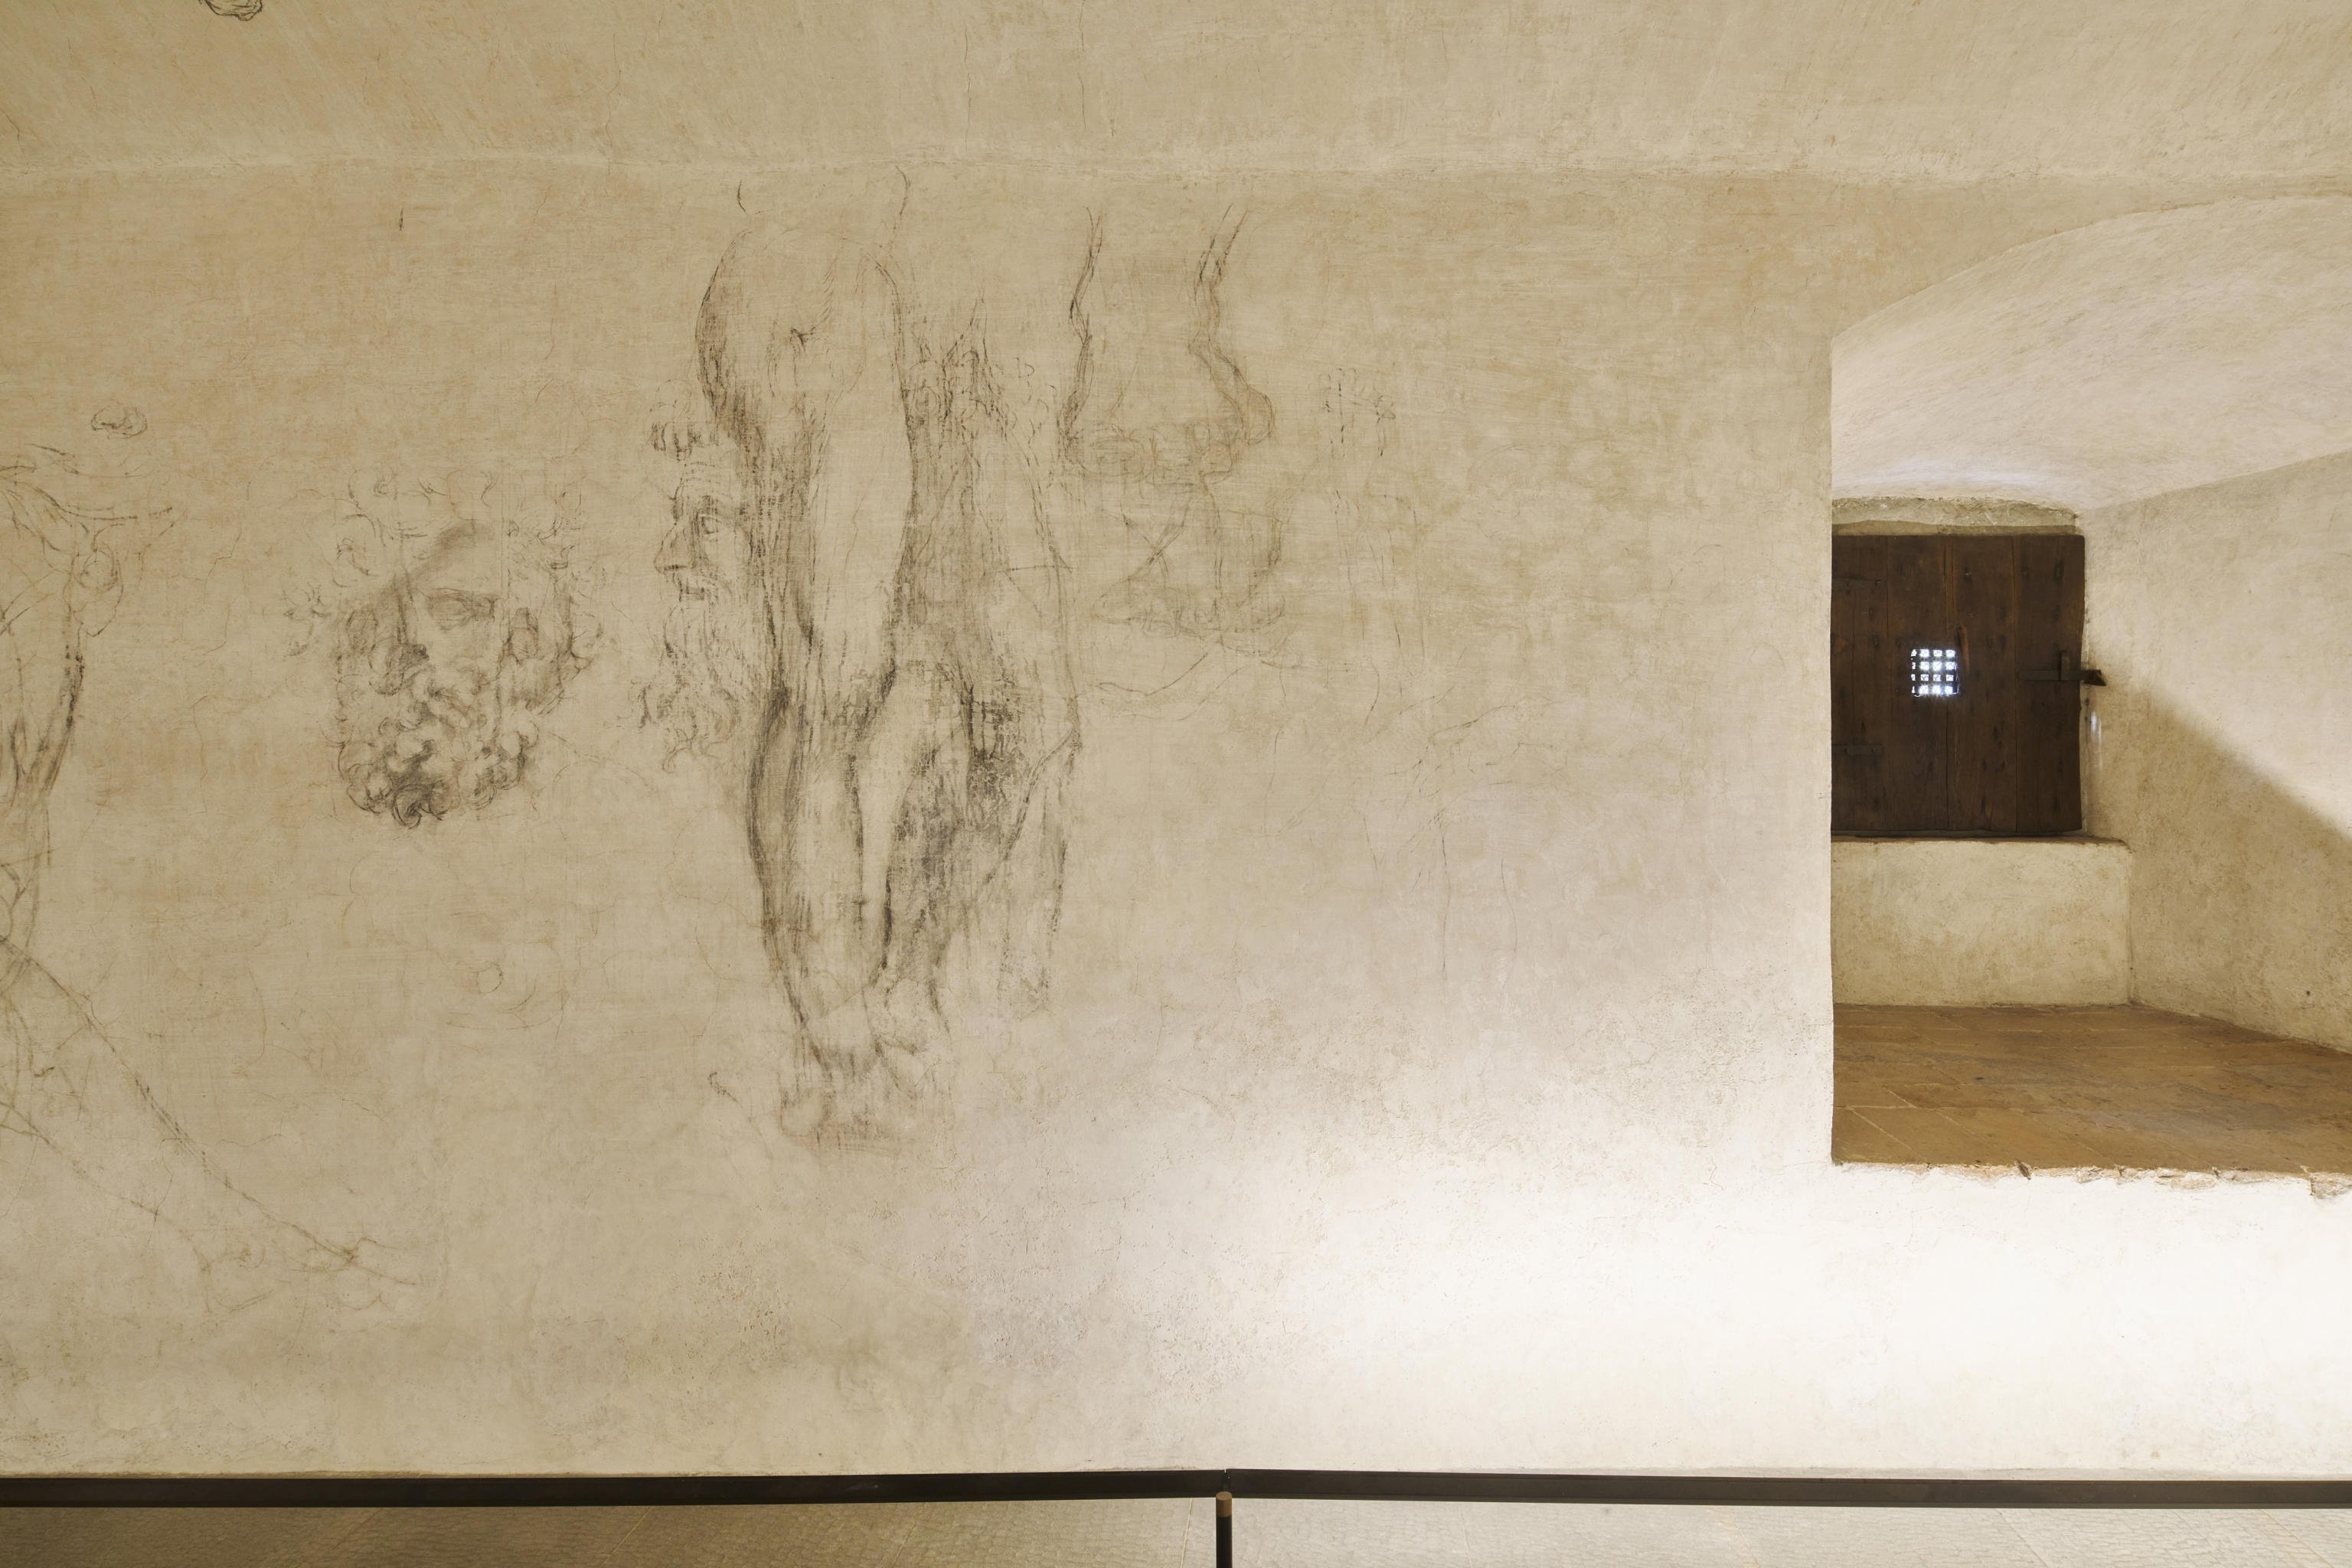 Michelangelo architectural drawings - SKETCH FOR THE TOMB OF JULIUS II  Drawing. Uffizi, Florence | Michel ange, Comment peindre, Dessin  architecture